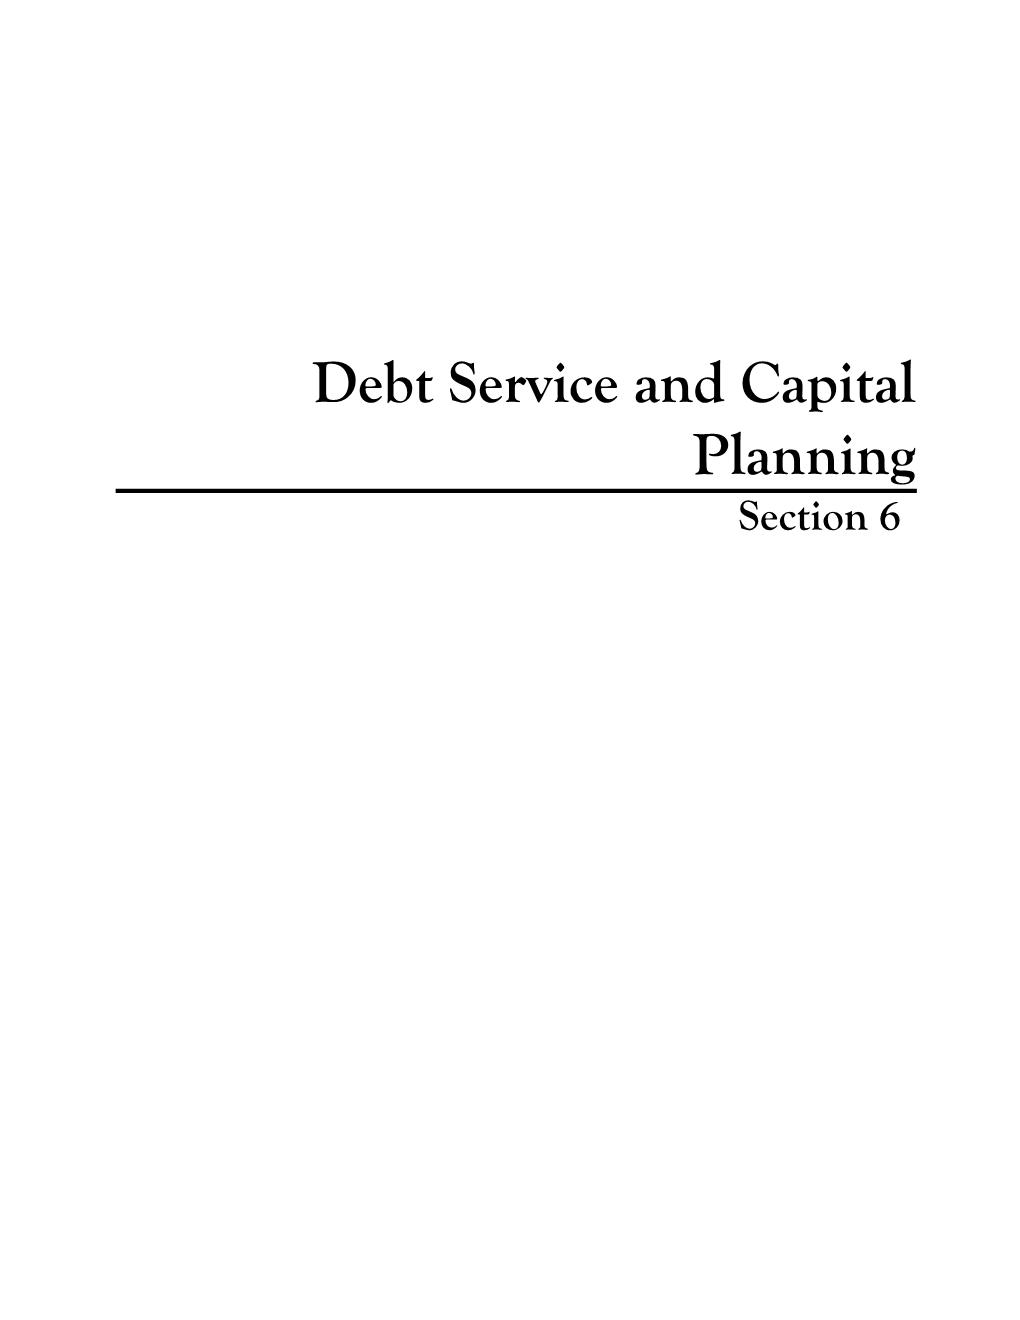 Debt Service and Capital Planning Section 6